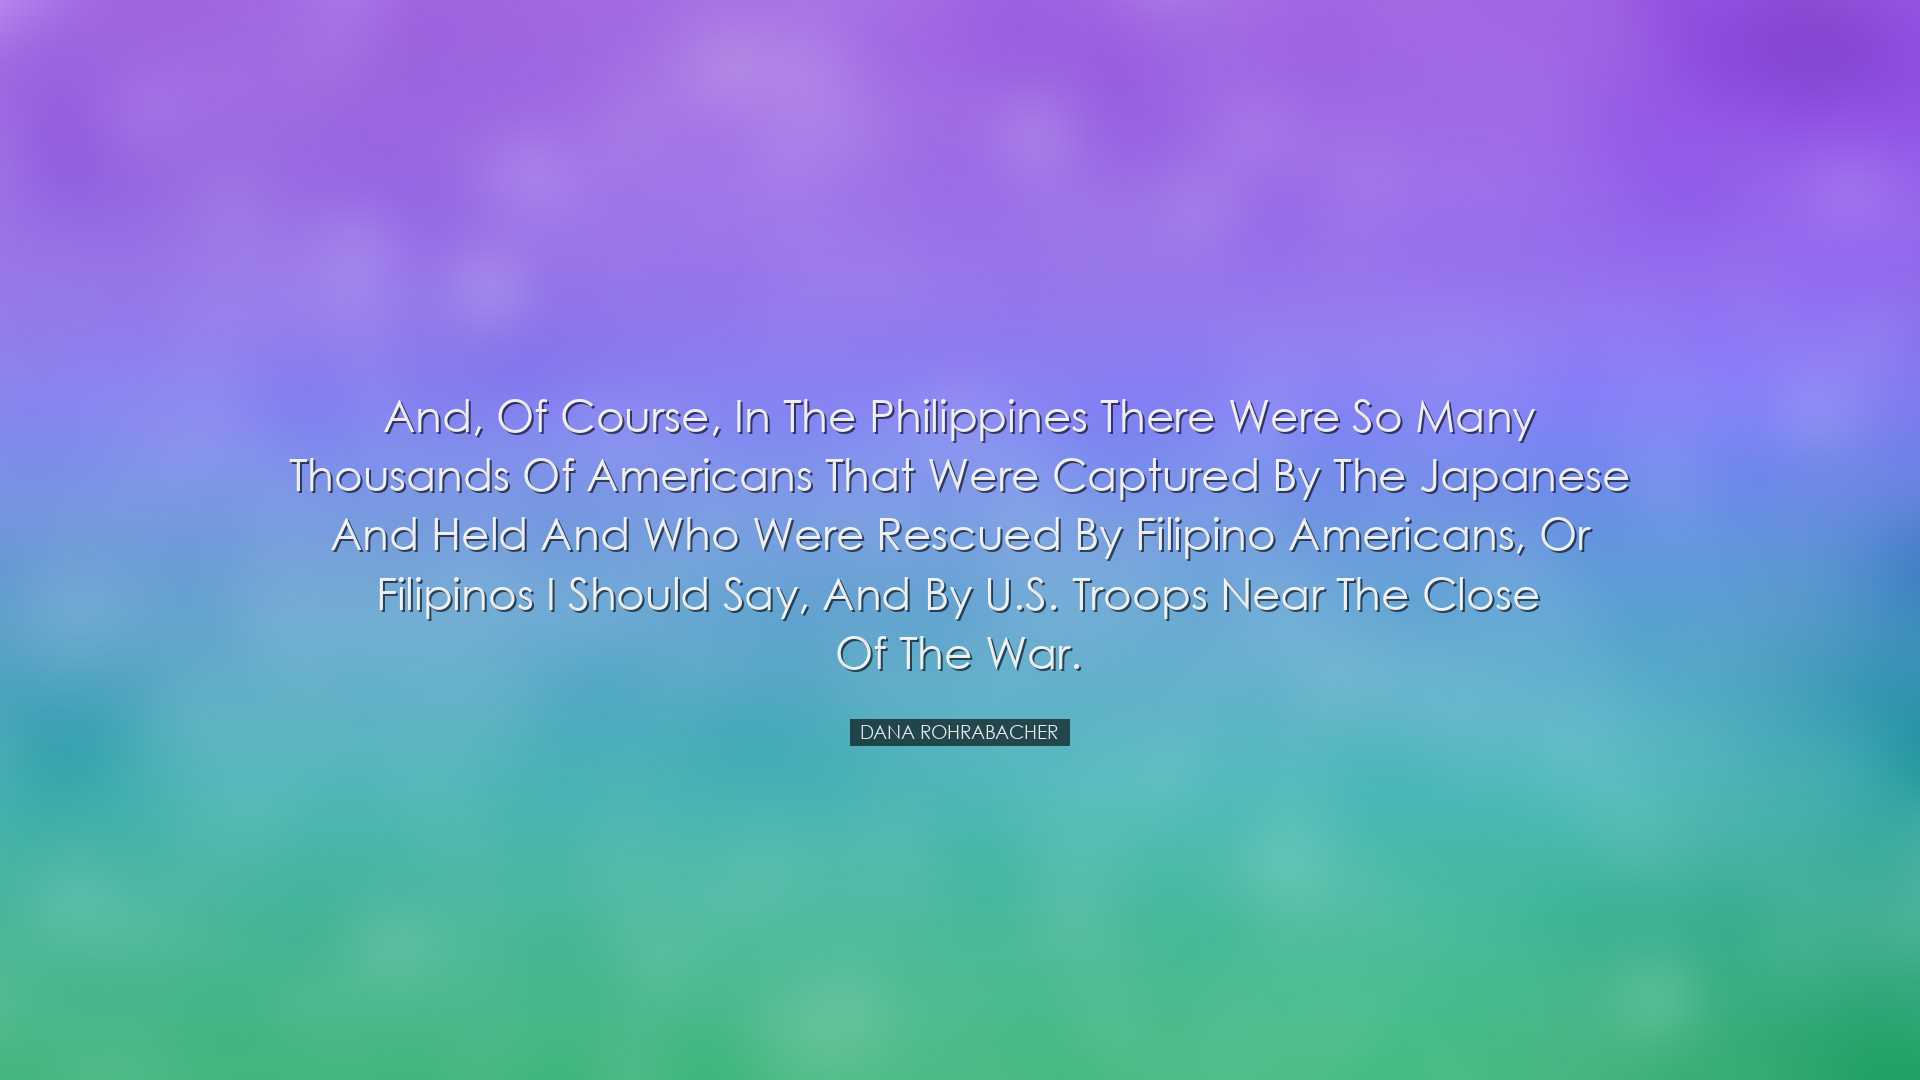 And, of course, in the Philippines there were so many thousands of